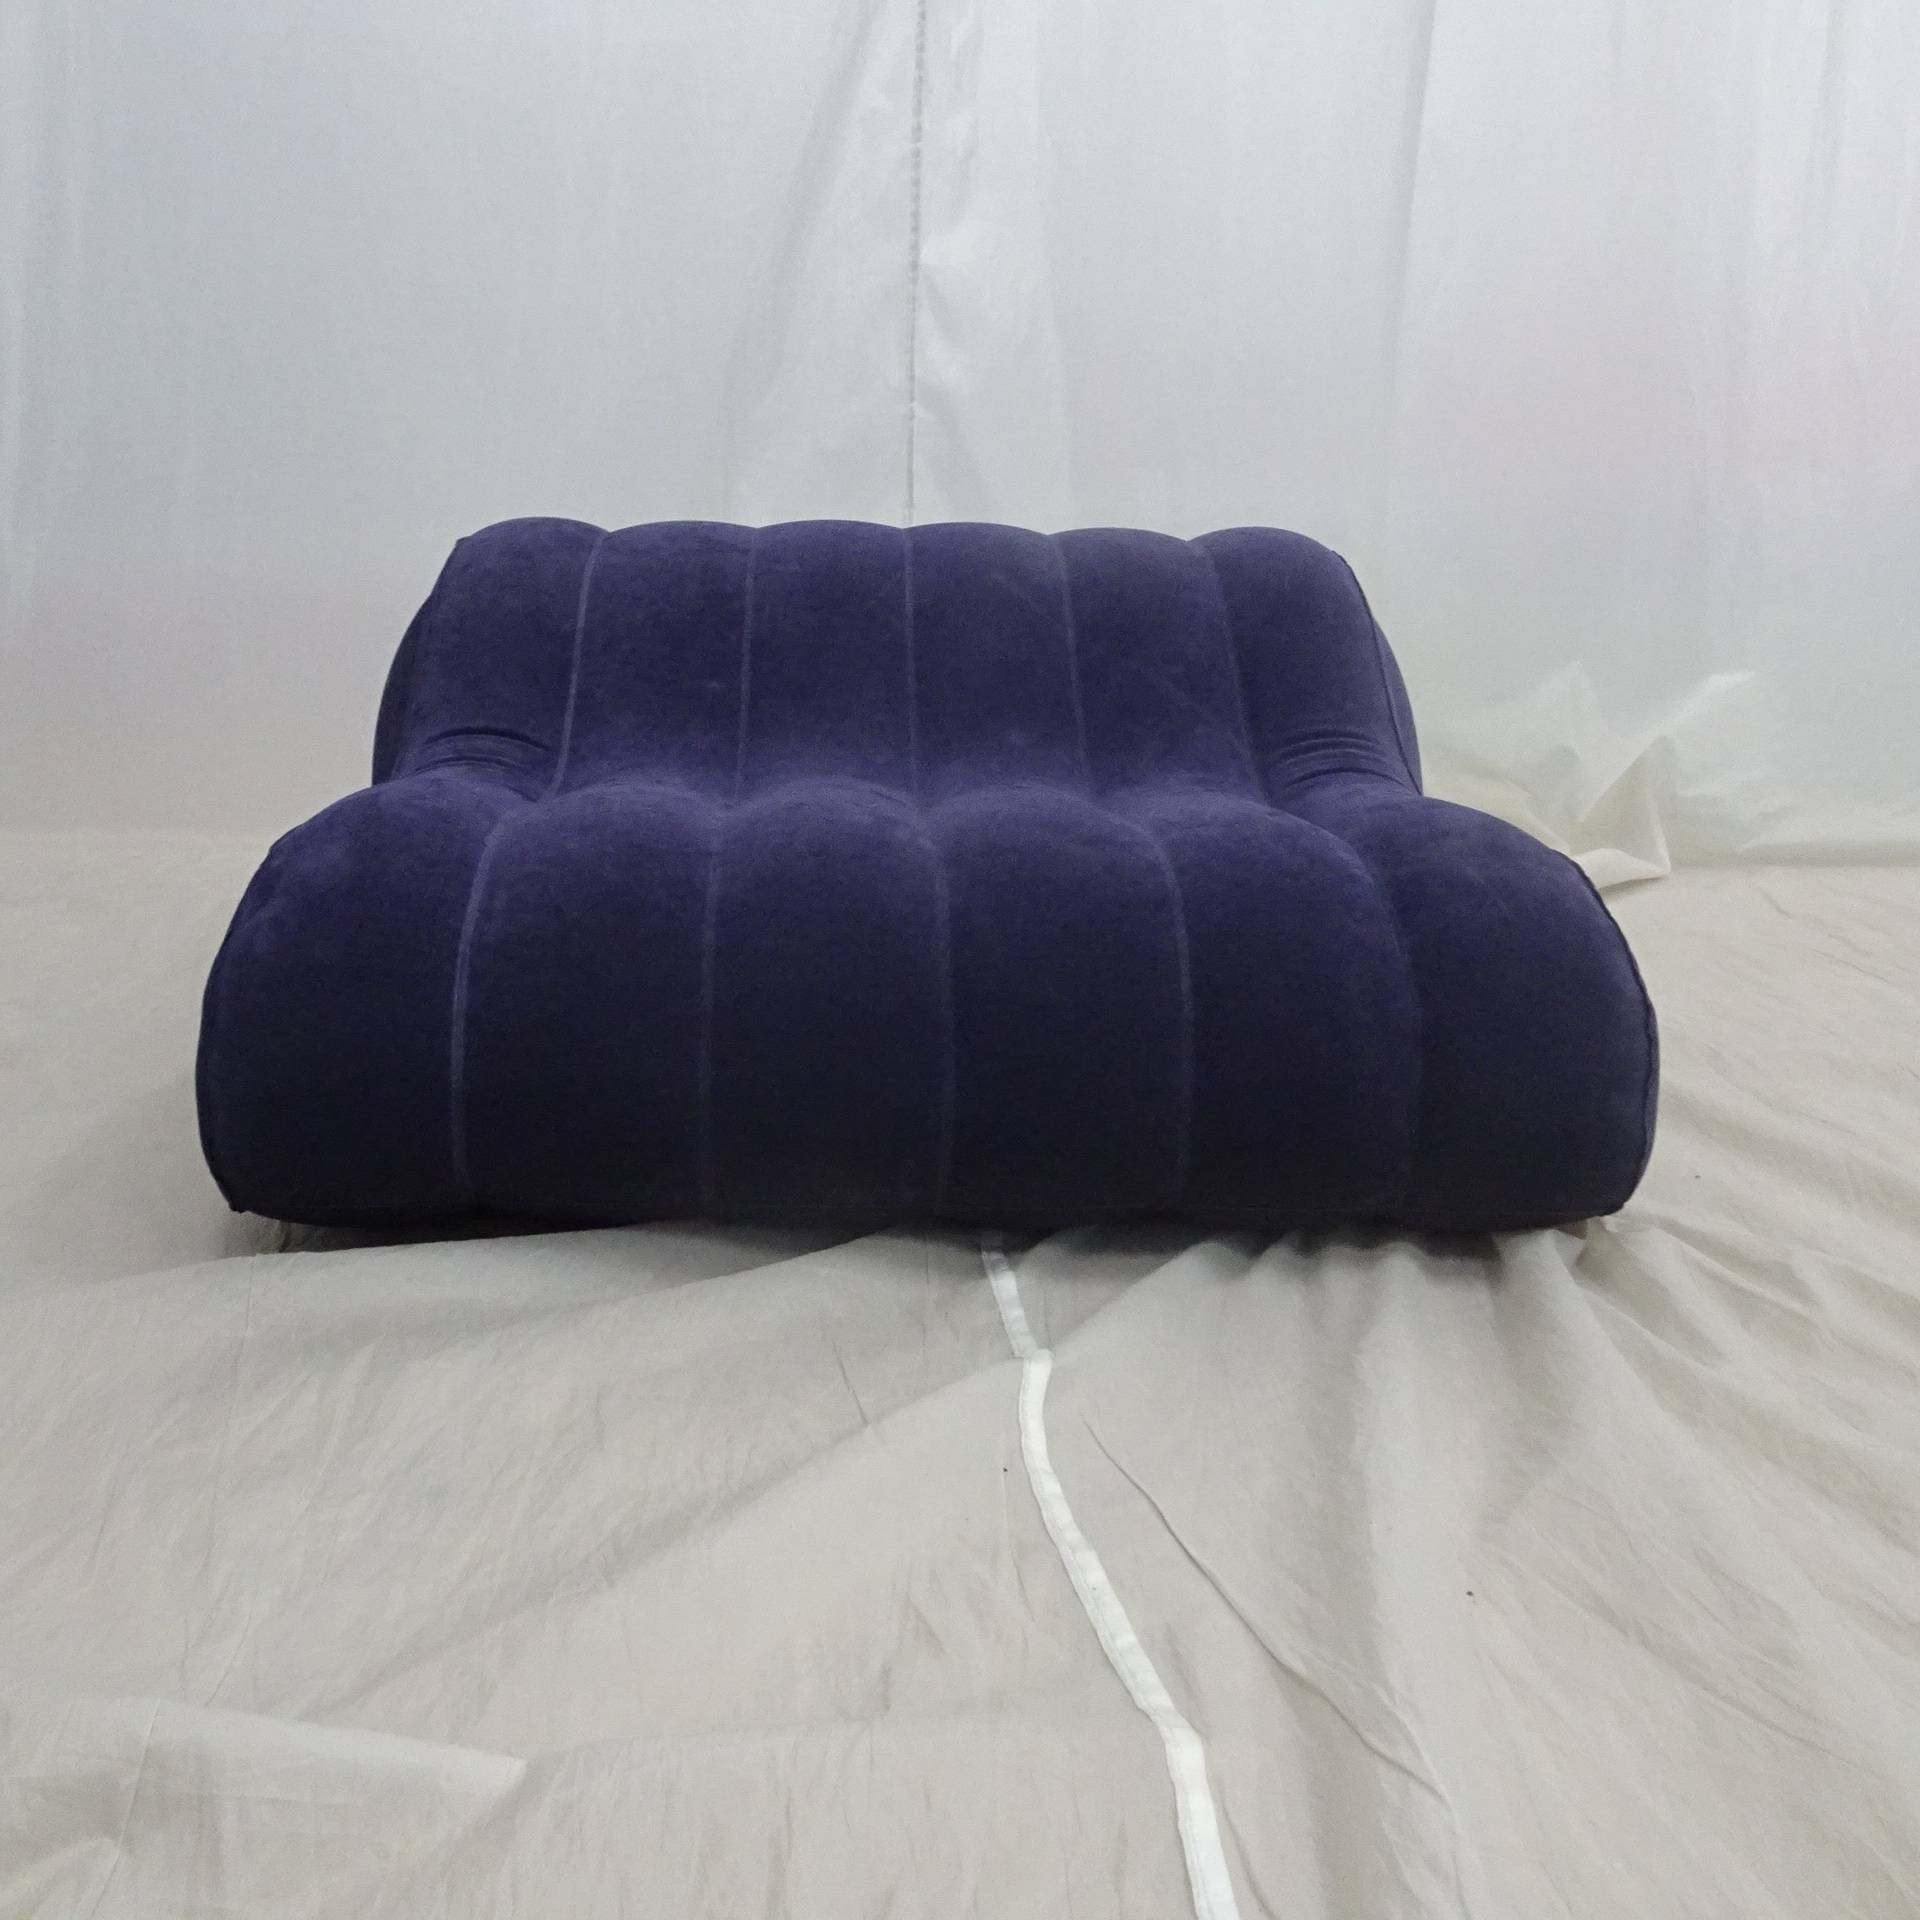 Customised Small Size Inflatable S-Shaped Sexy Love Flocking Sofa For Neck & Lumbar Support Travel